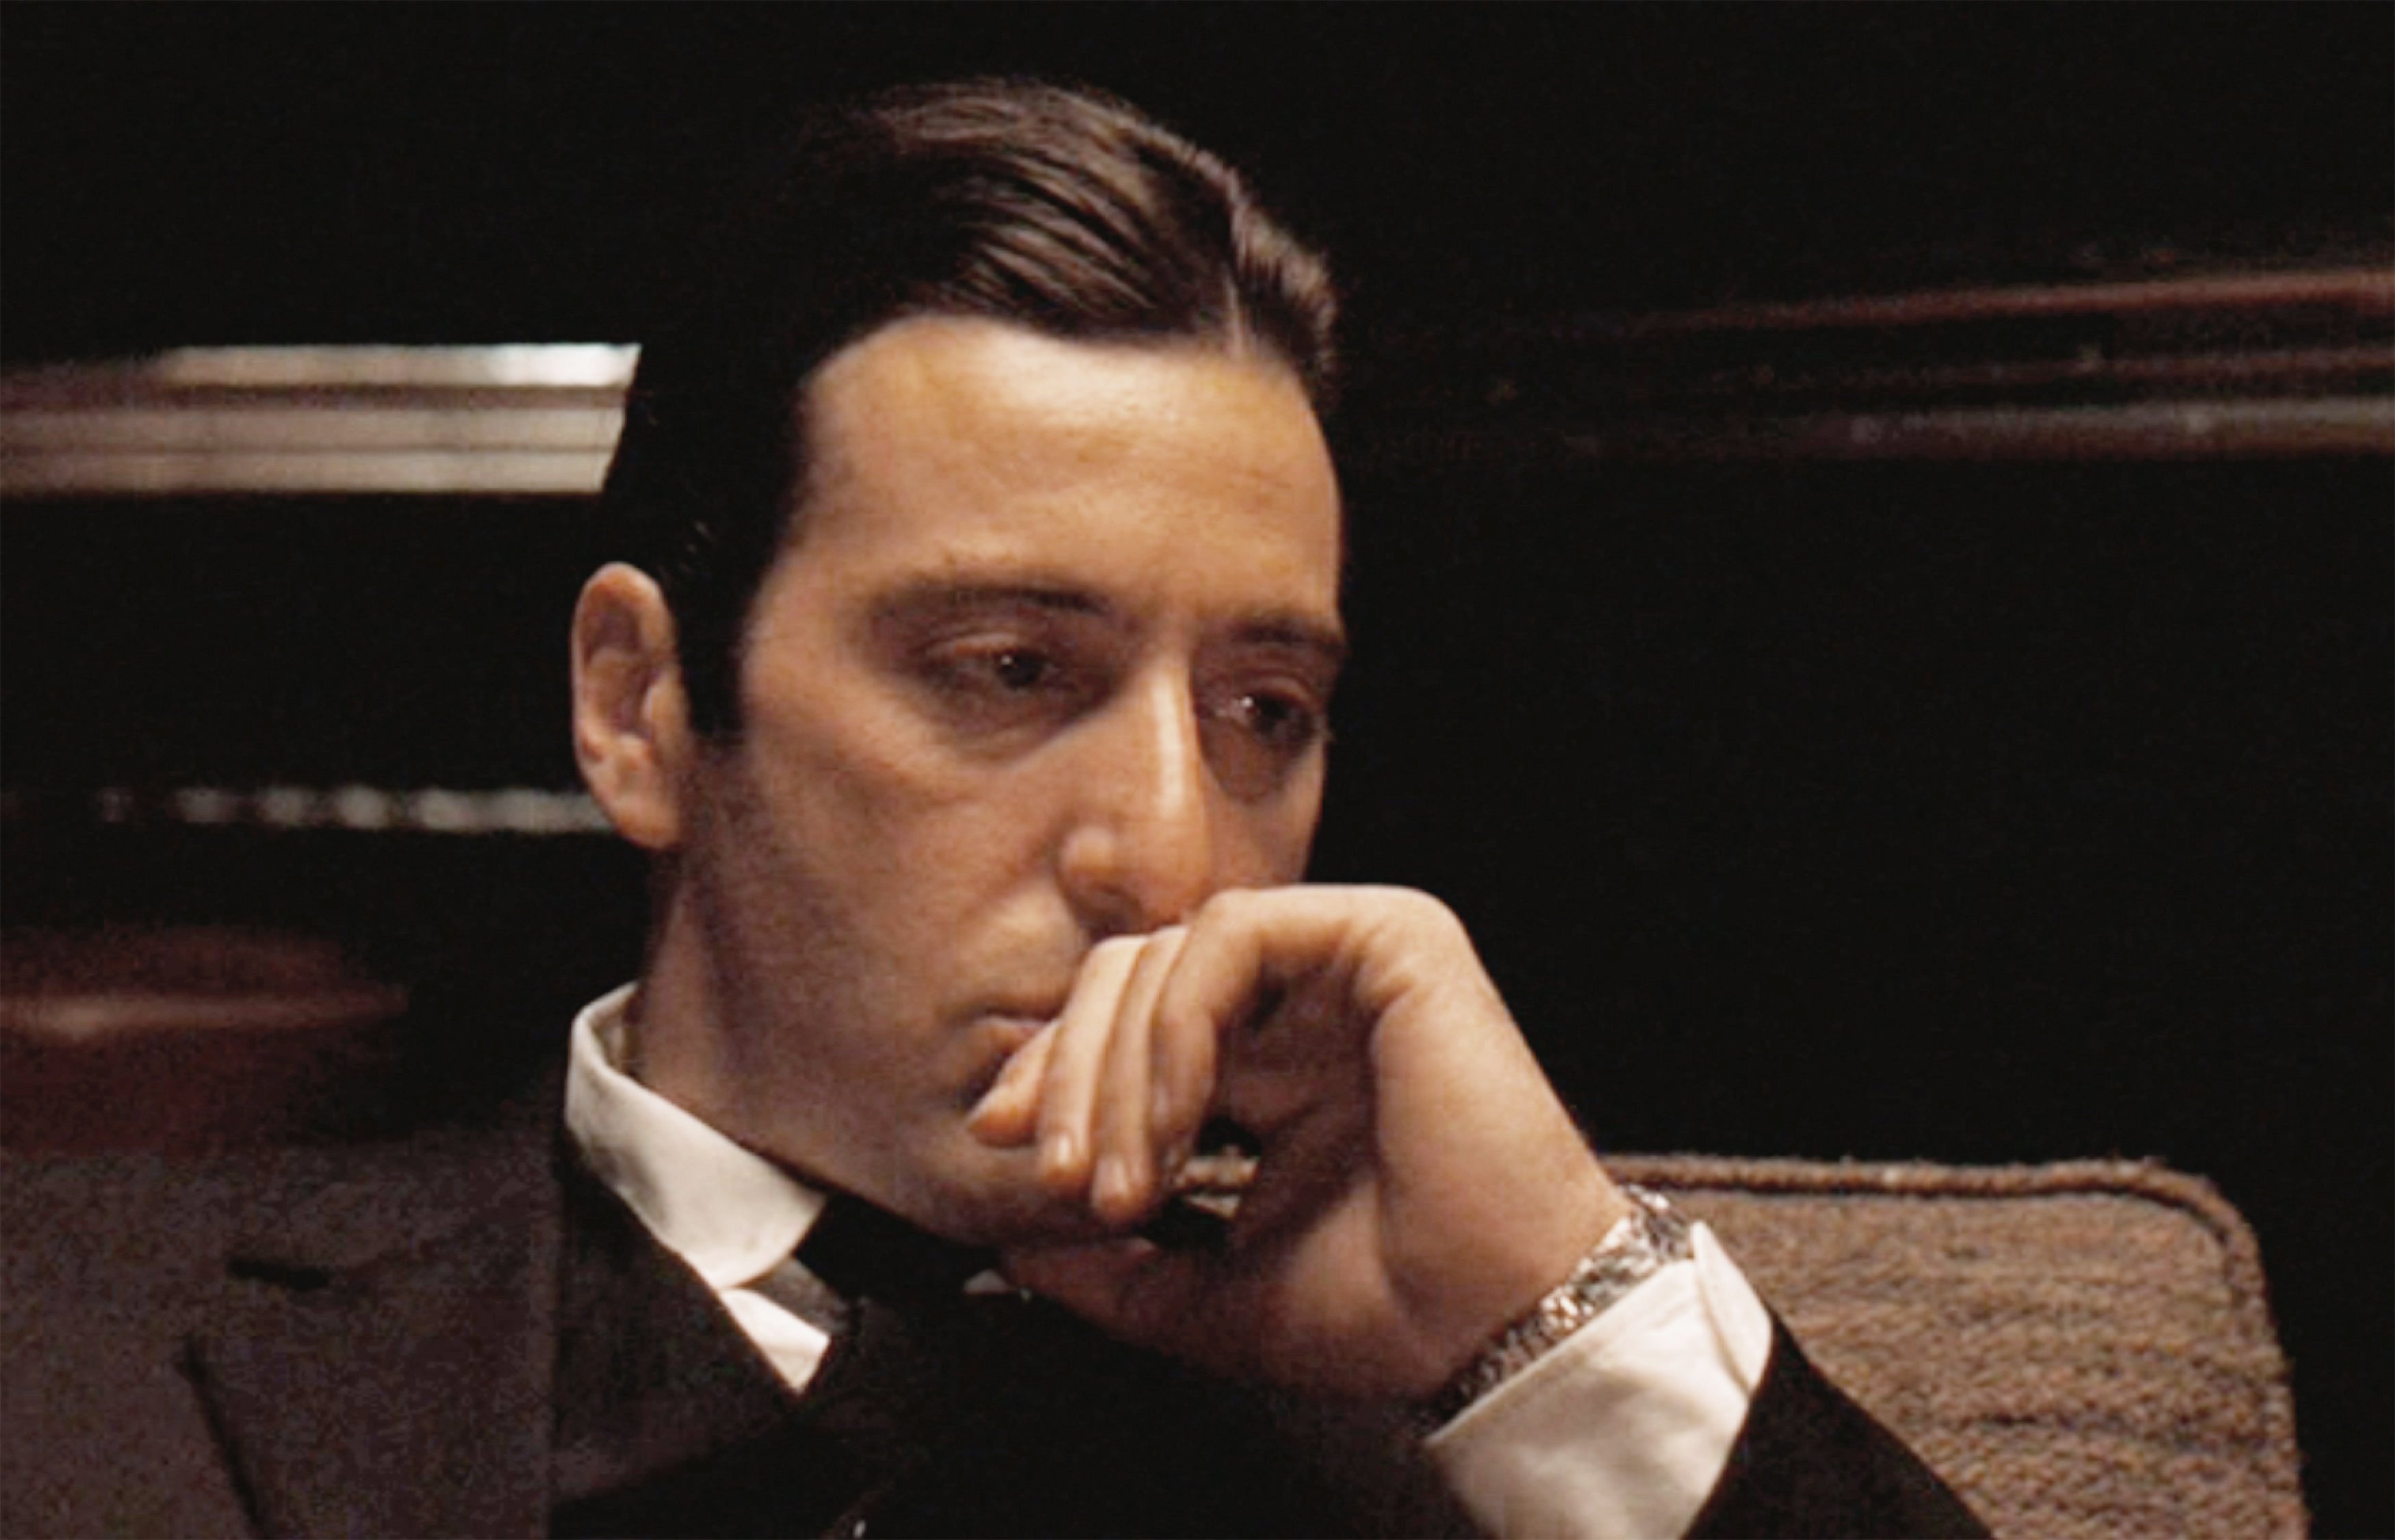 Al Pacino reflects on the fame he received after his role in The Godfather